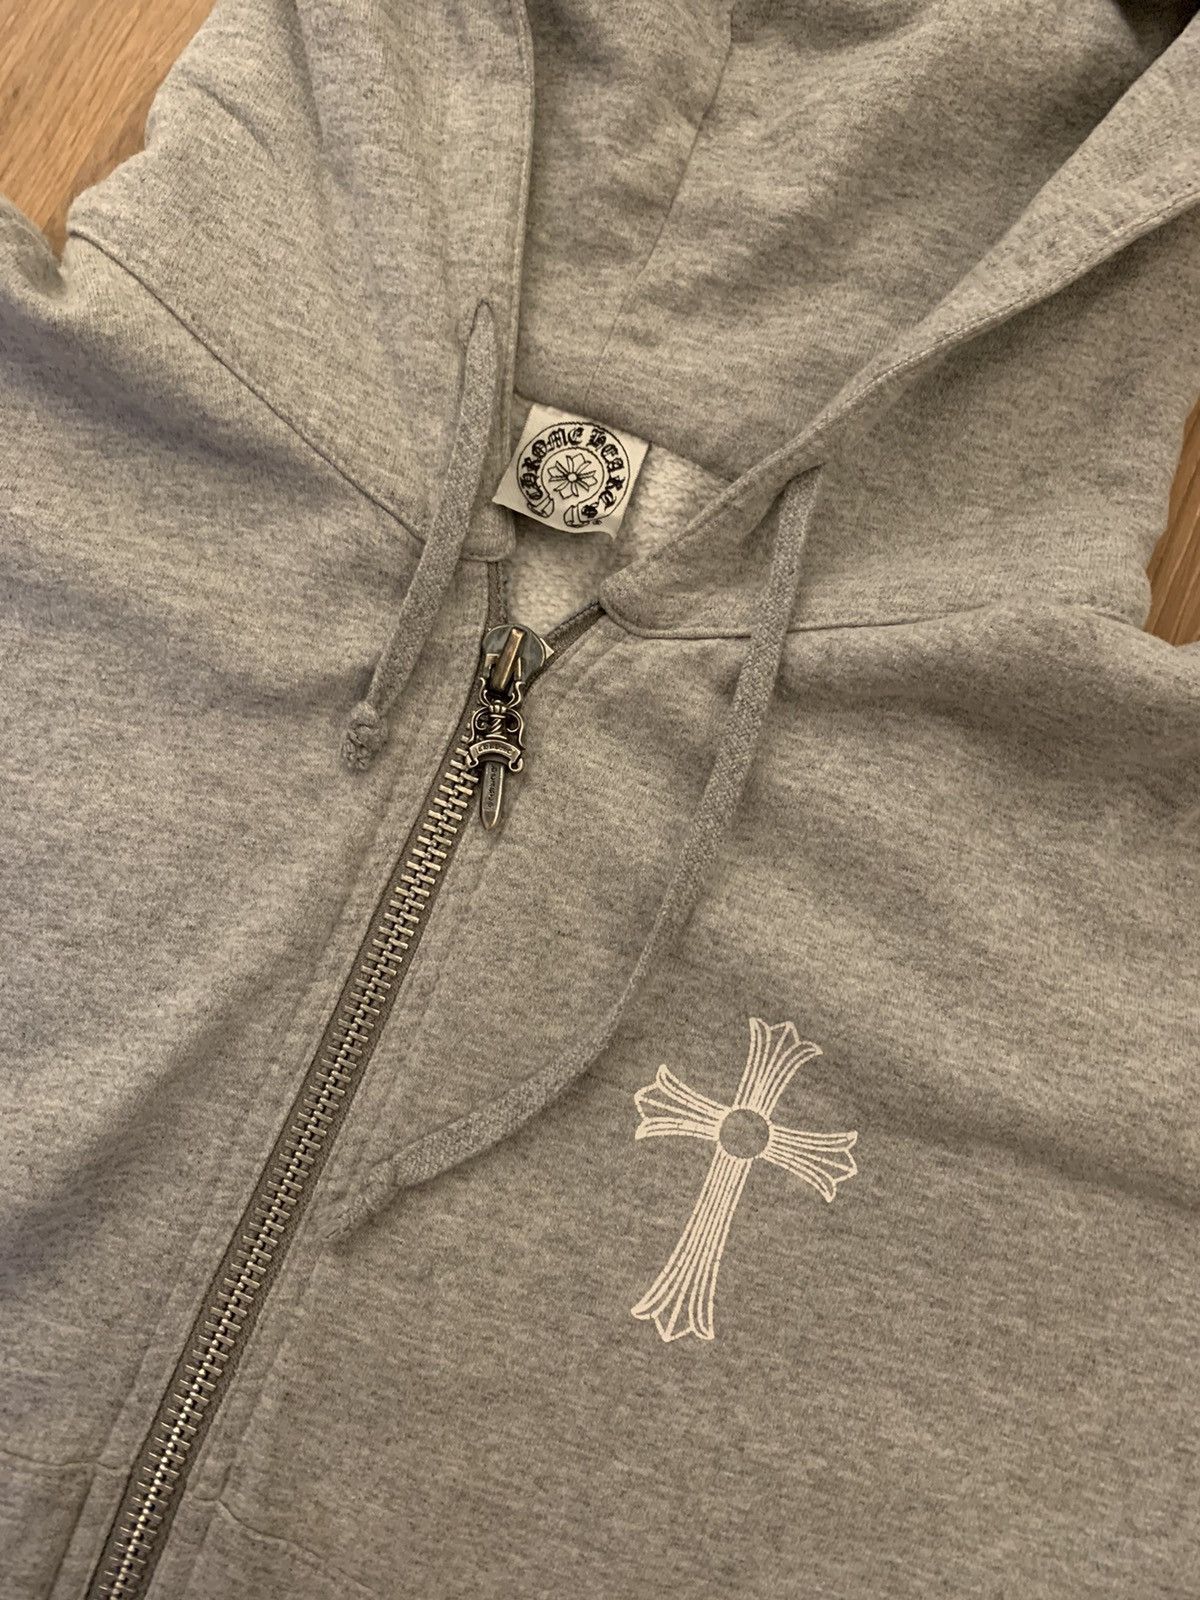 Chrome Hearts Very Rare Cross Zip Up Hoodie Grey Silver Dagger Vintage Size US S / EU 44-46 / 1 - 2 Preview